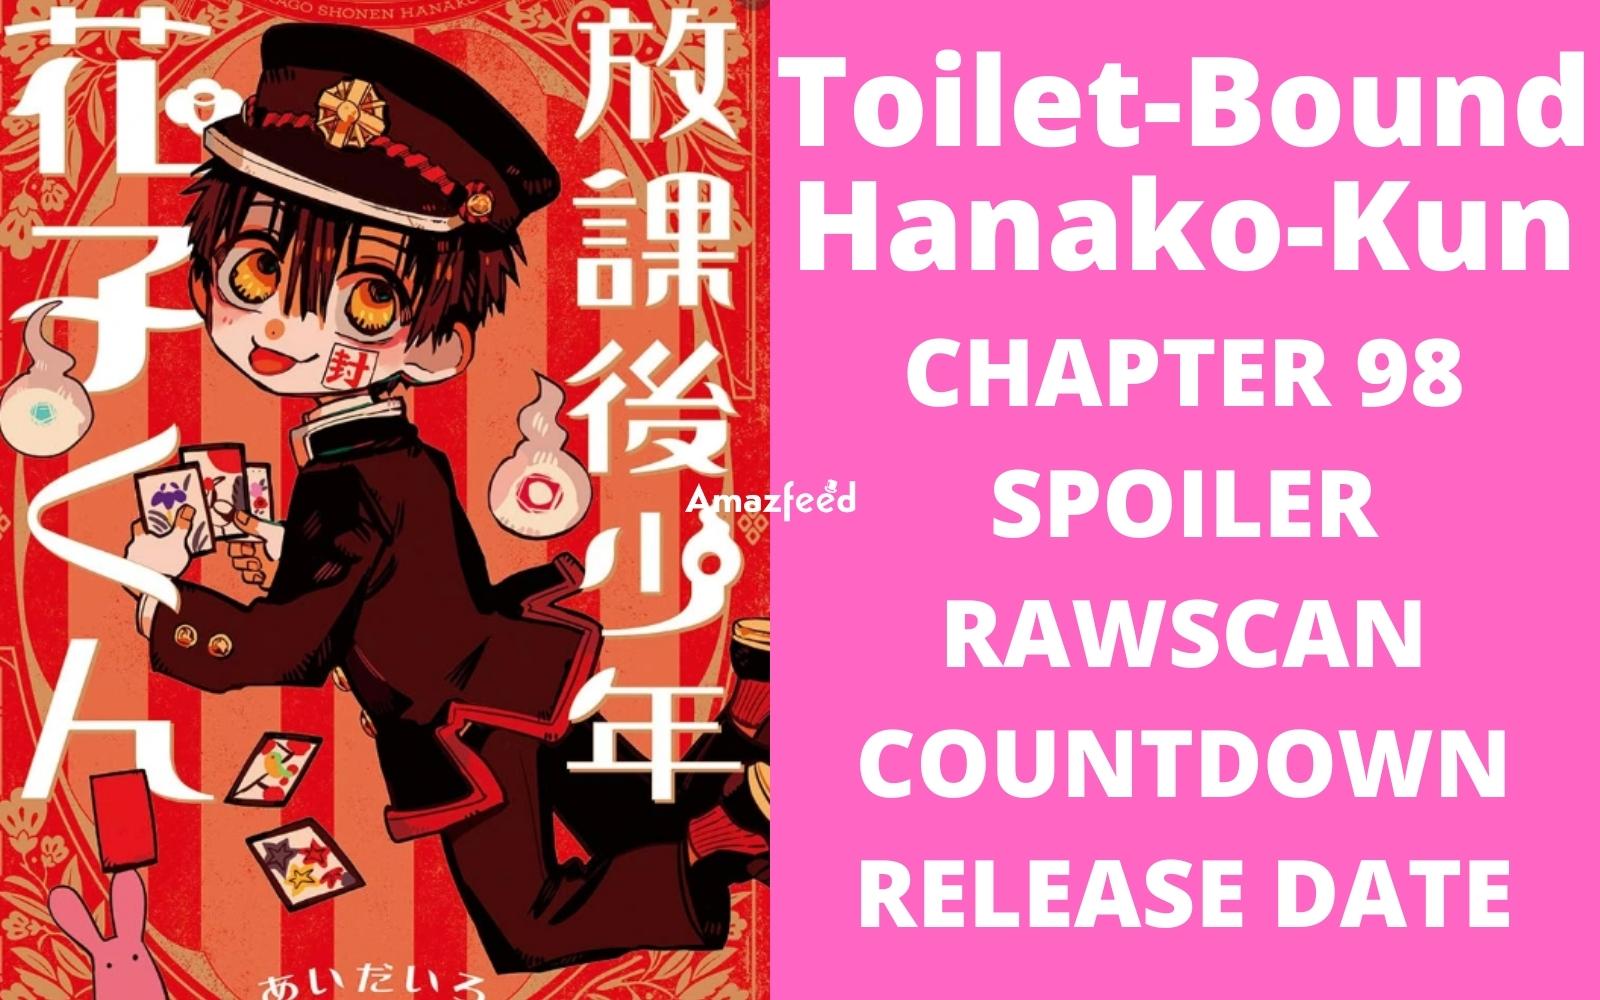 Toilet-Bound Hanako-Kun Chapter 98 Spoiler, Release Date, Raw Scan, Countdown, Color Page